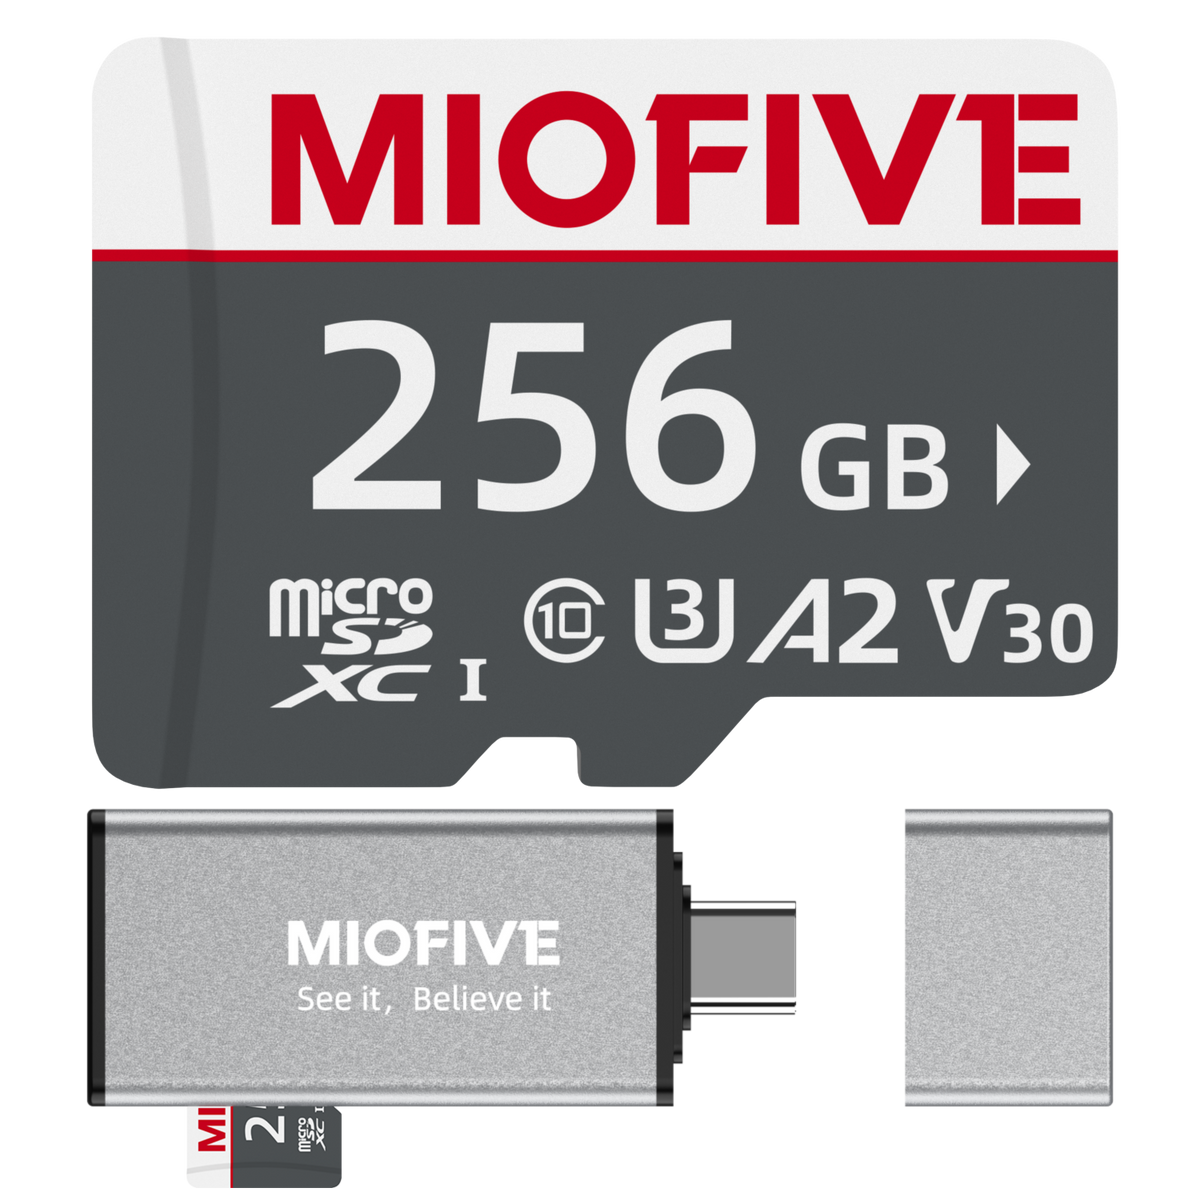 Miofive 256GB microSDXC Memory Card - Ultimate Micro SD Card with USB 3.0 Type-C Card Reader 170MB/s, C10, U3, A2, V30, 4K for Dash Cams, Android Smartphones, Tablets, and Gaming devices